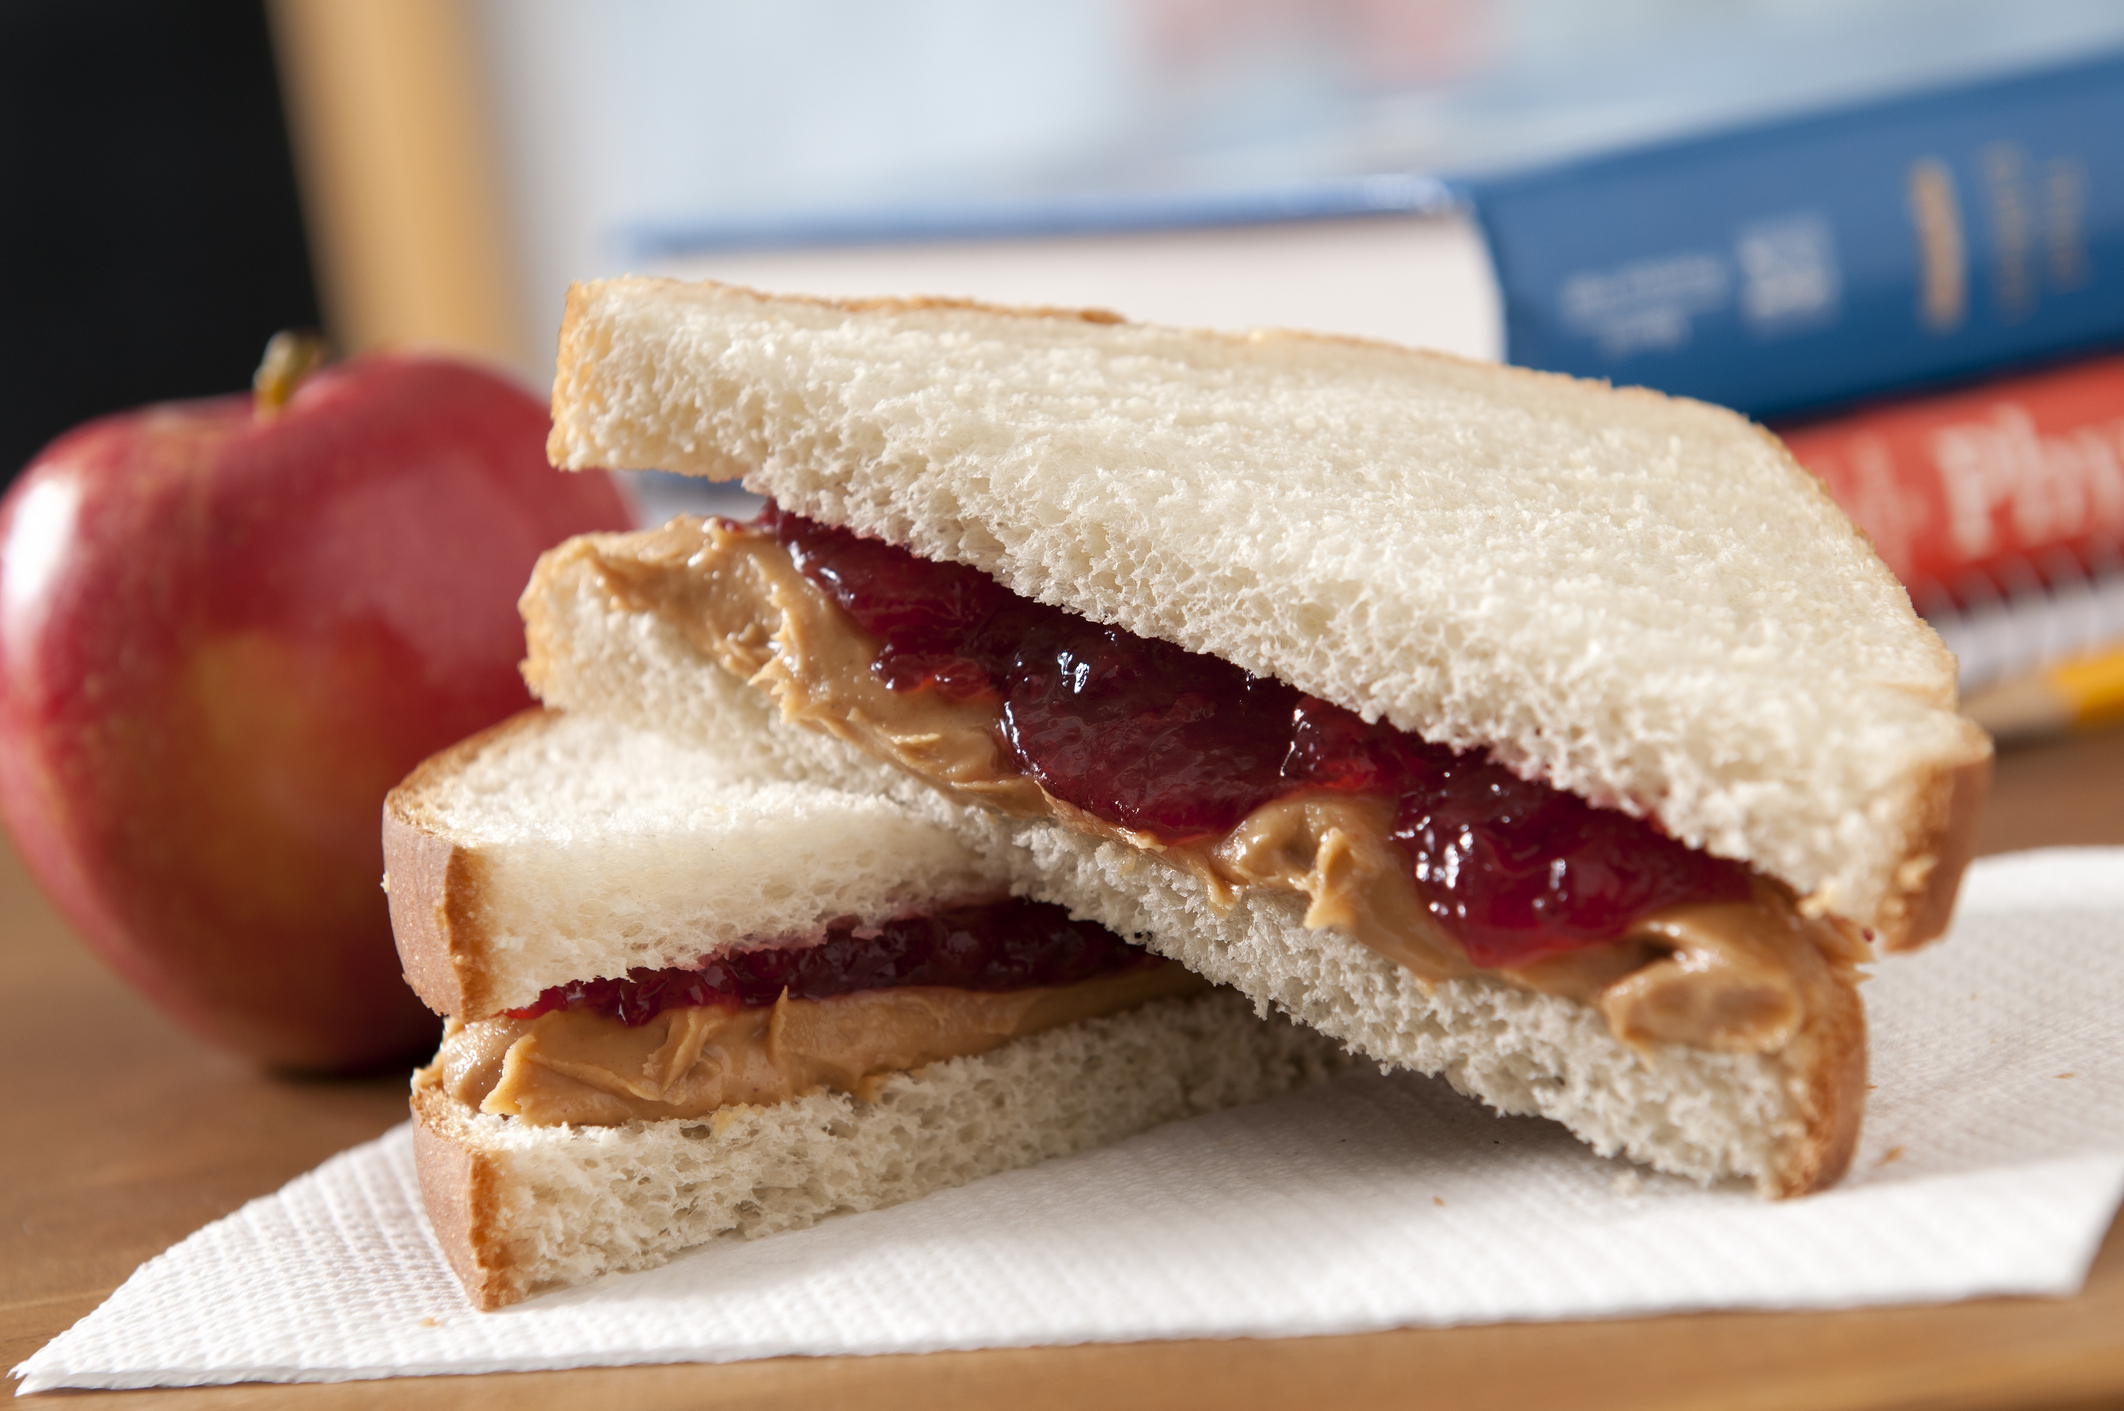 Peanut butter and jelly sandwich on white bread, with a whole apple and books in the background